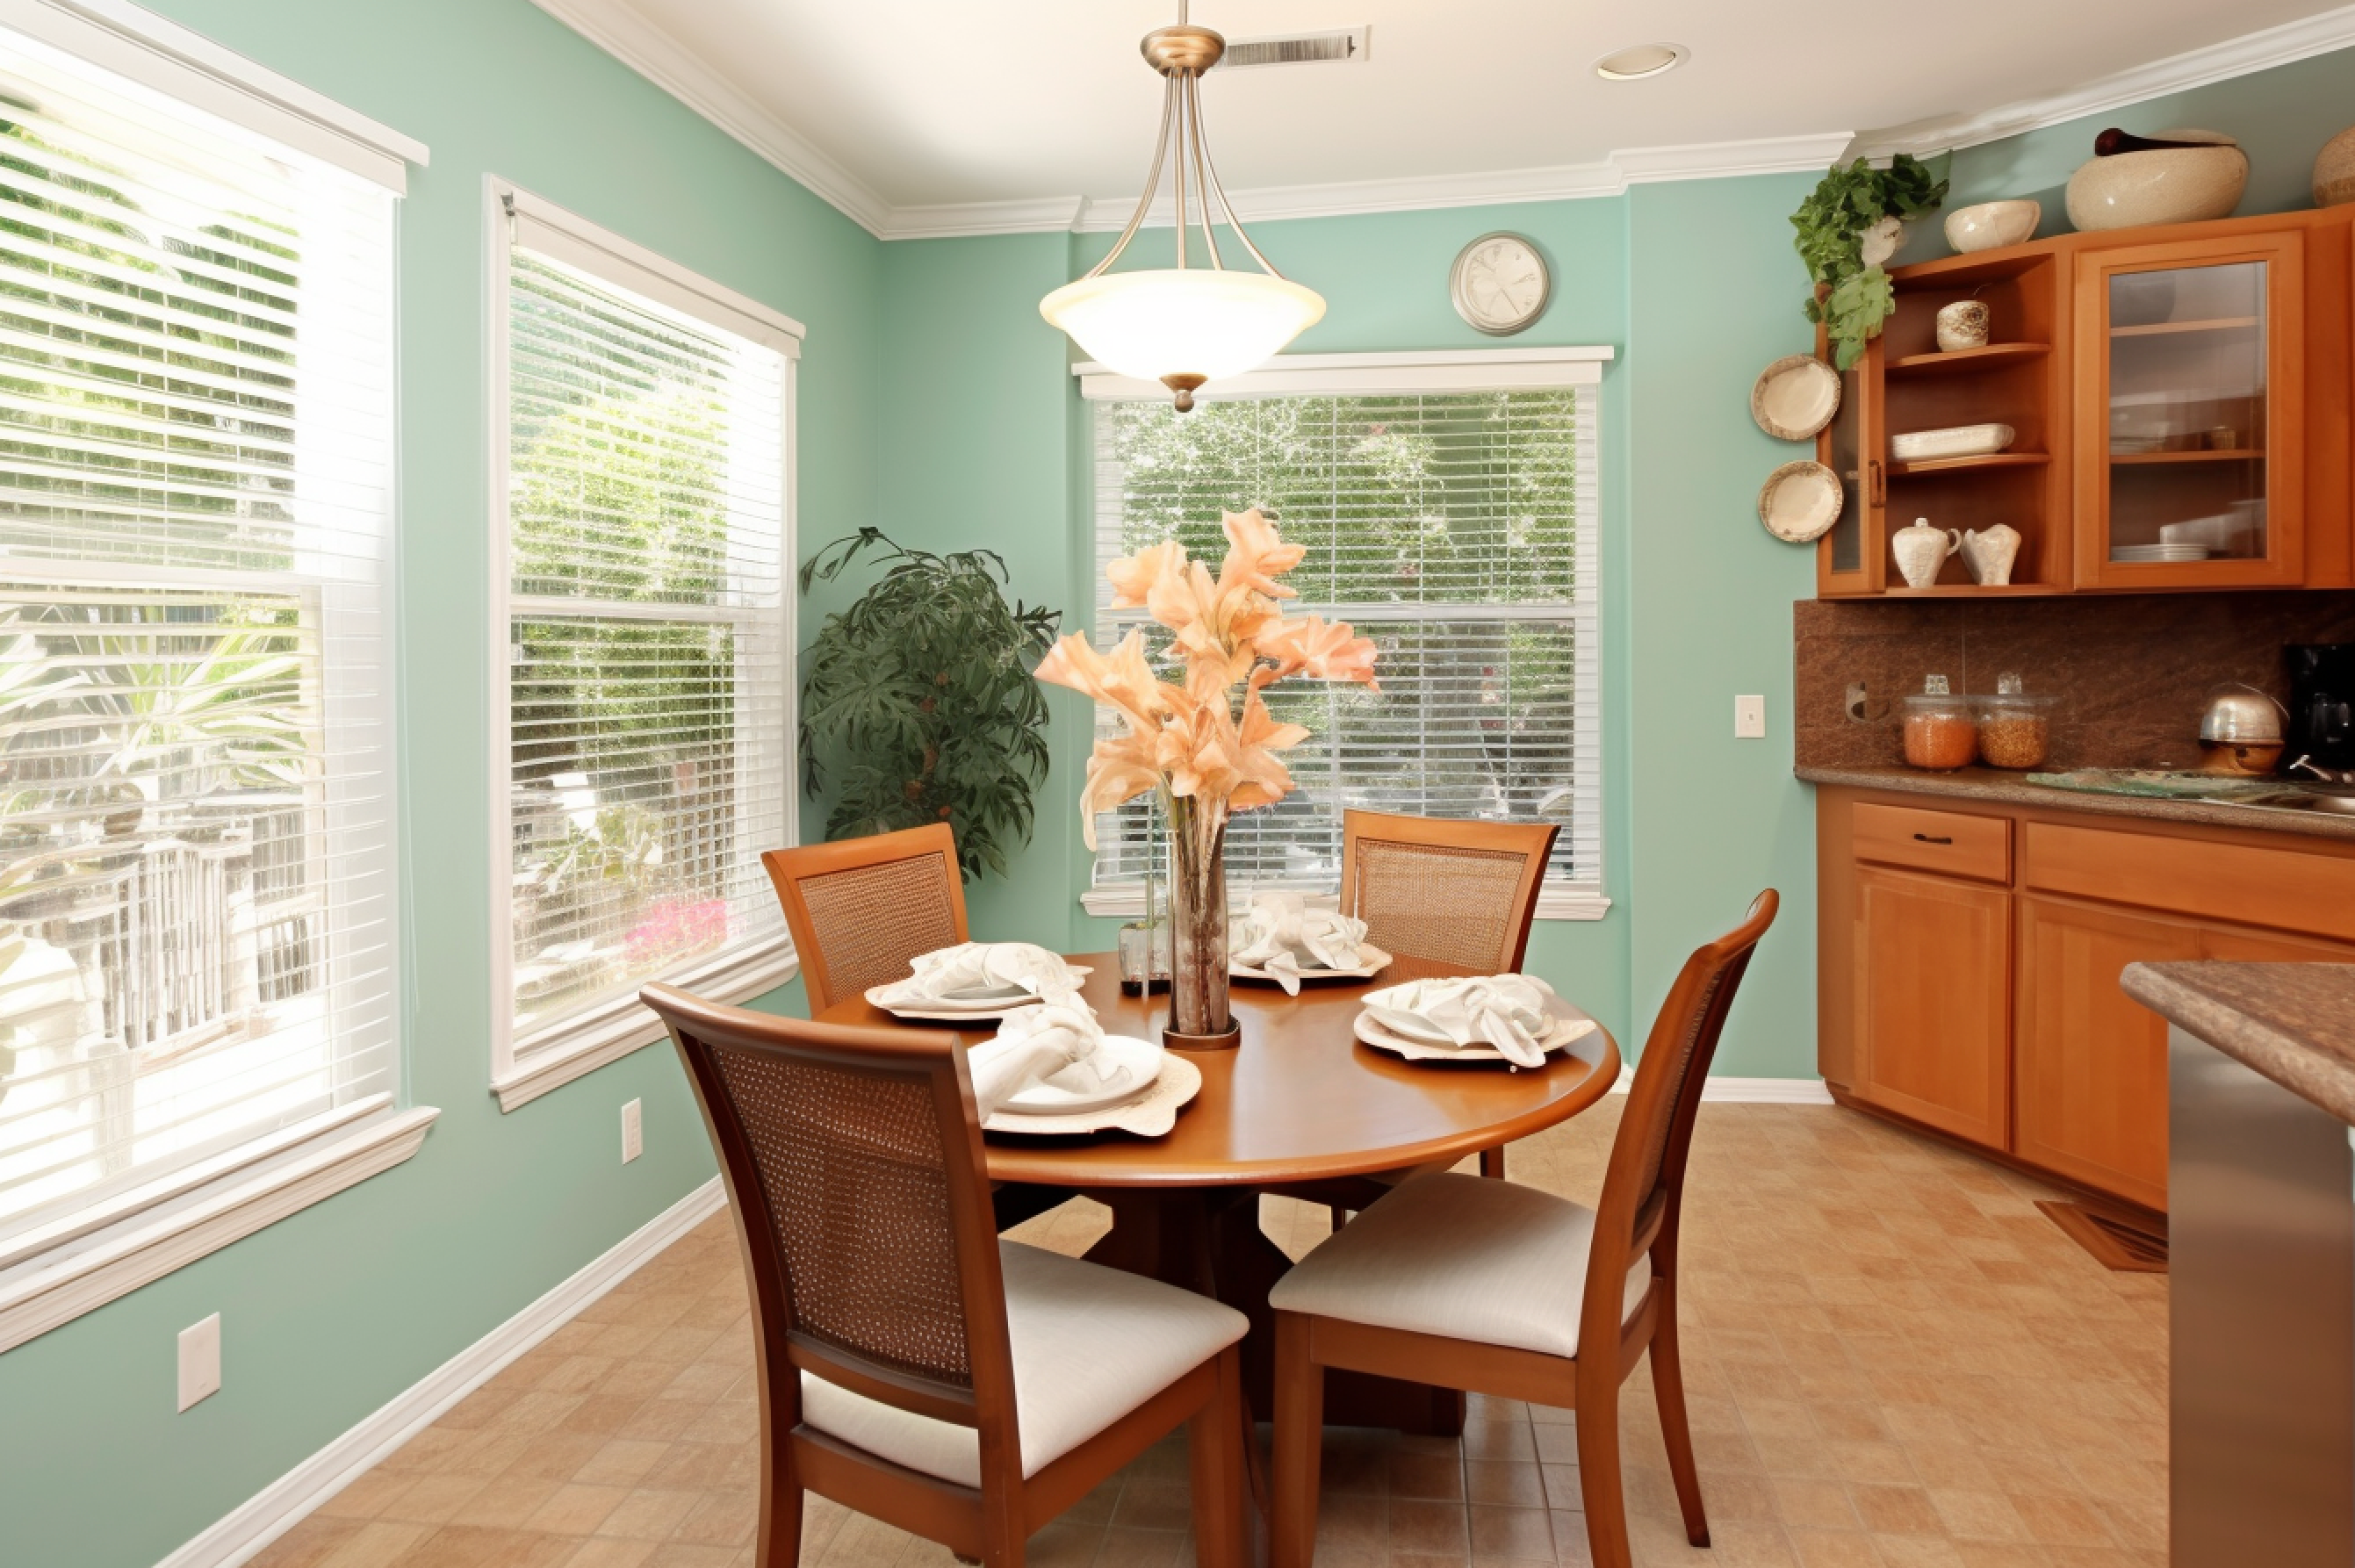 Image displaying a charming breakfast nook with pecan brown wooden furniture against refreshing mint green walls.